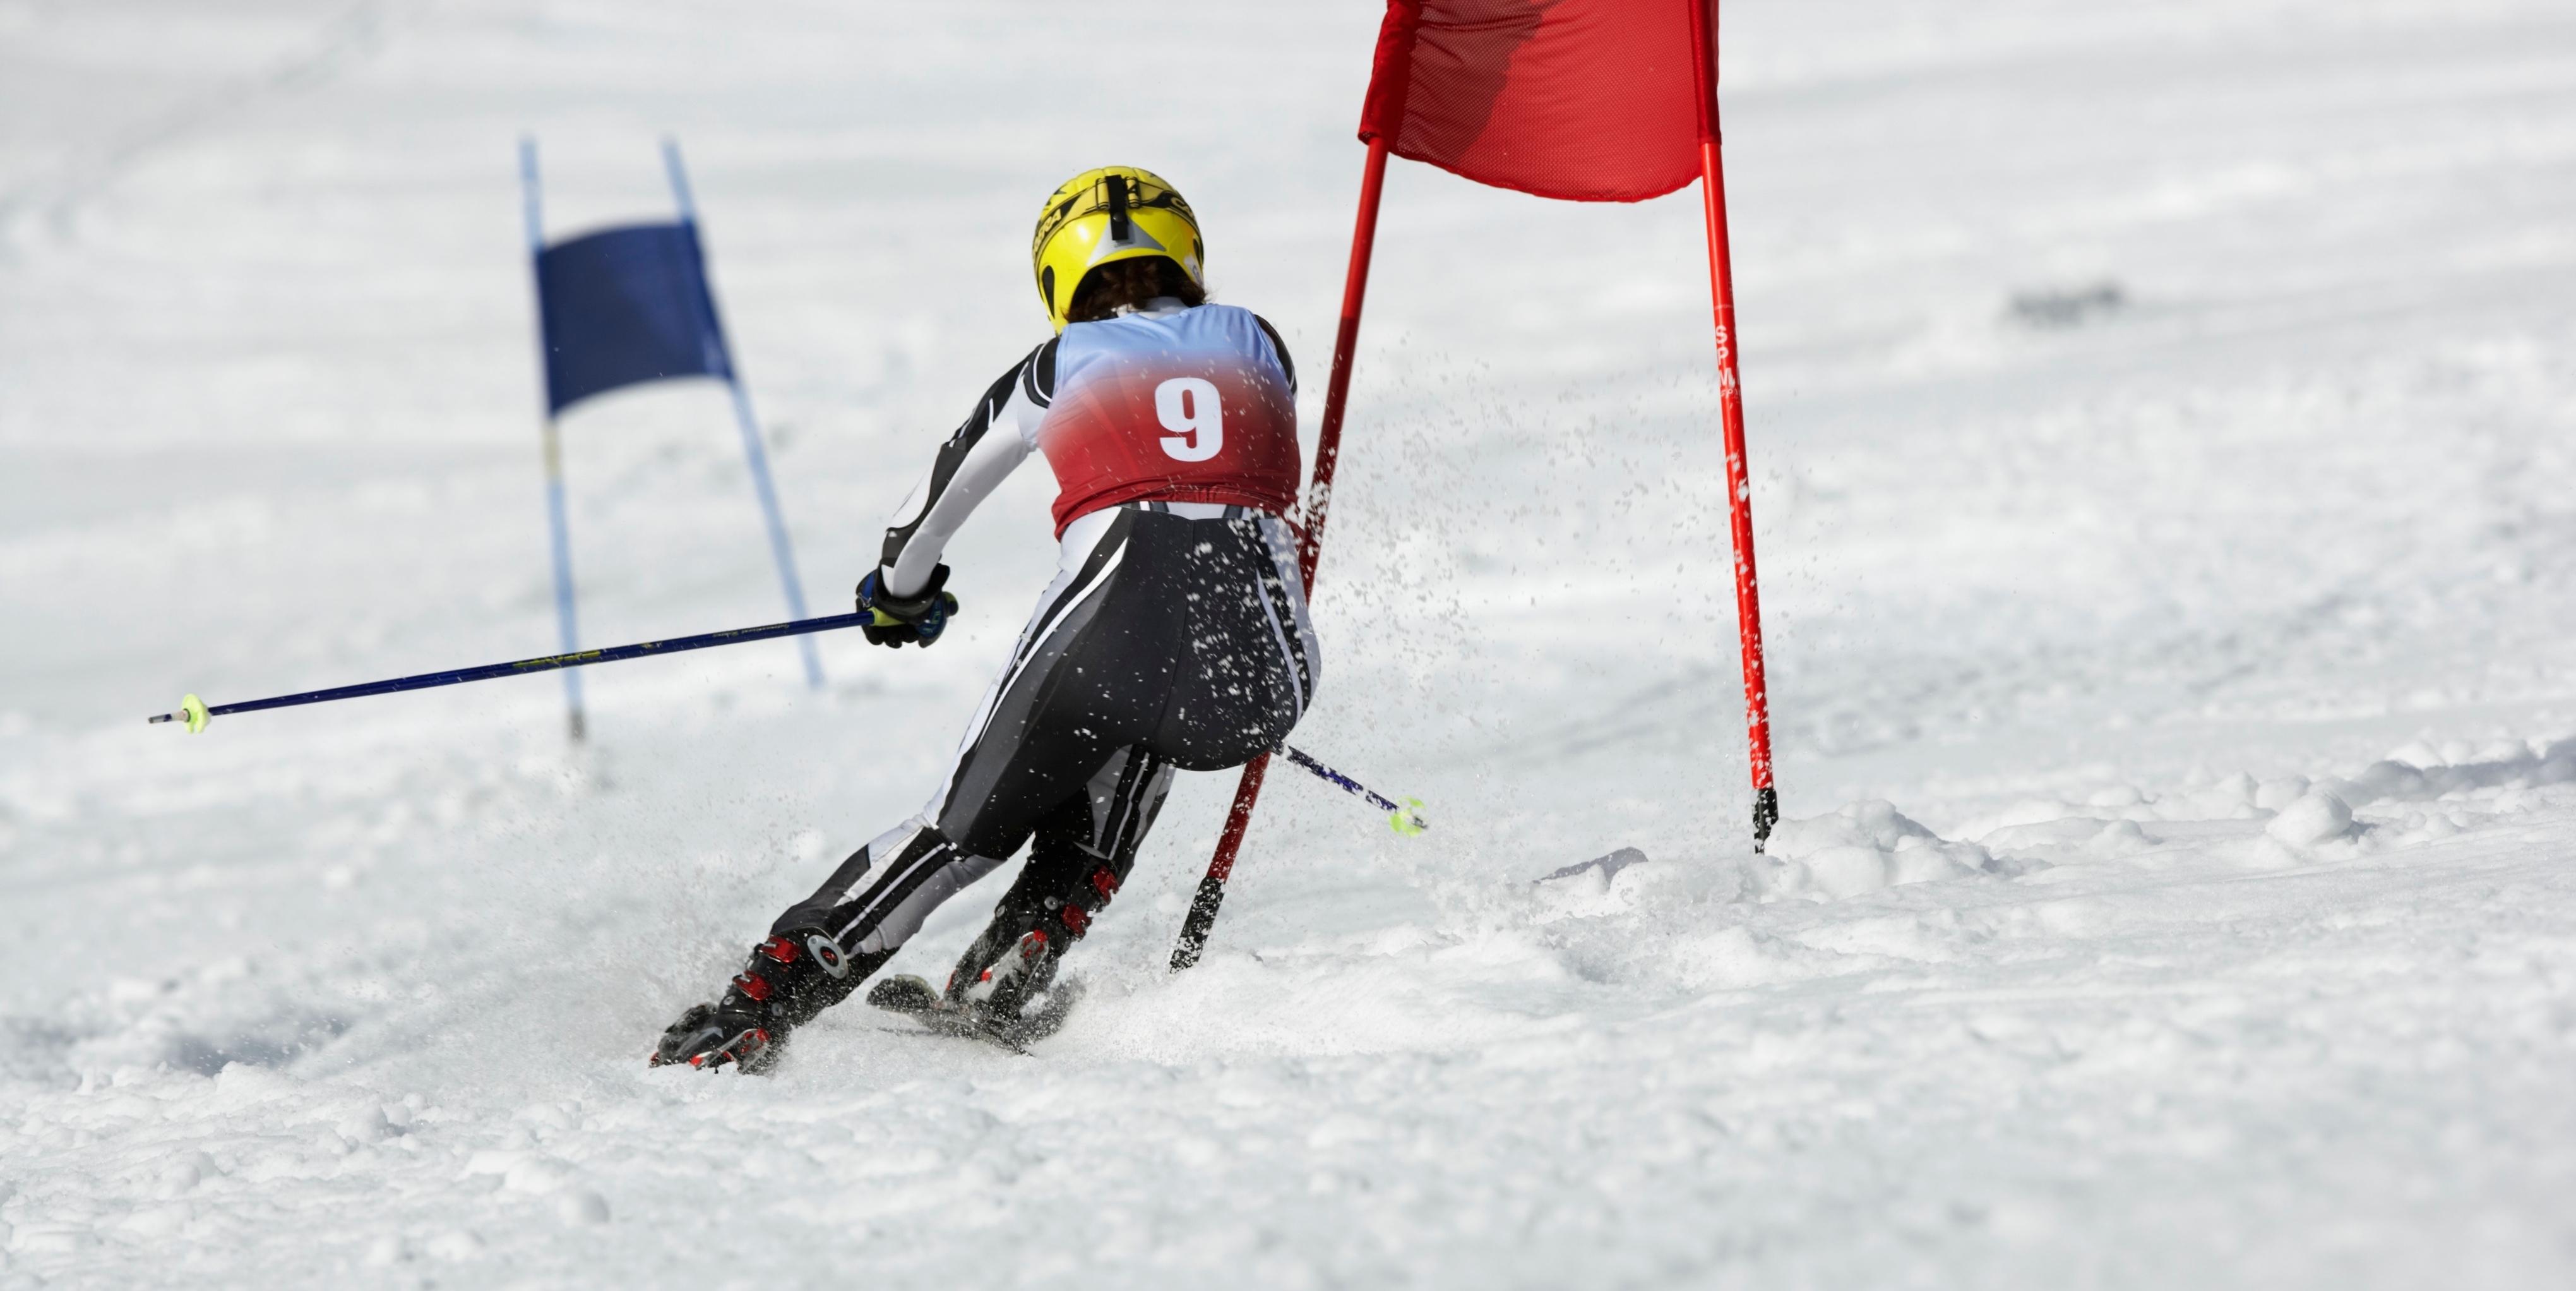 A female skier competing down a slope.